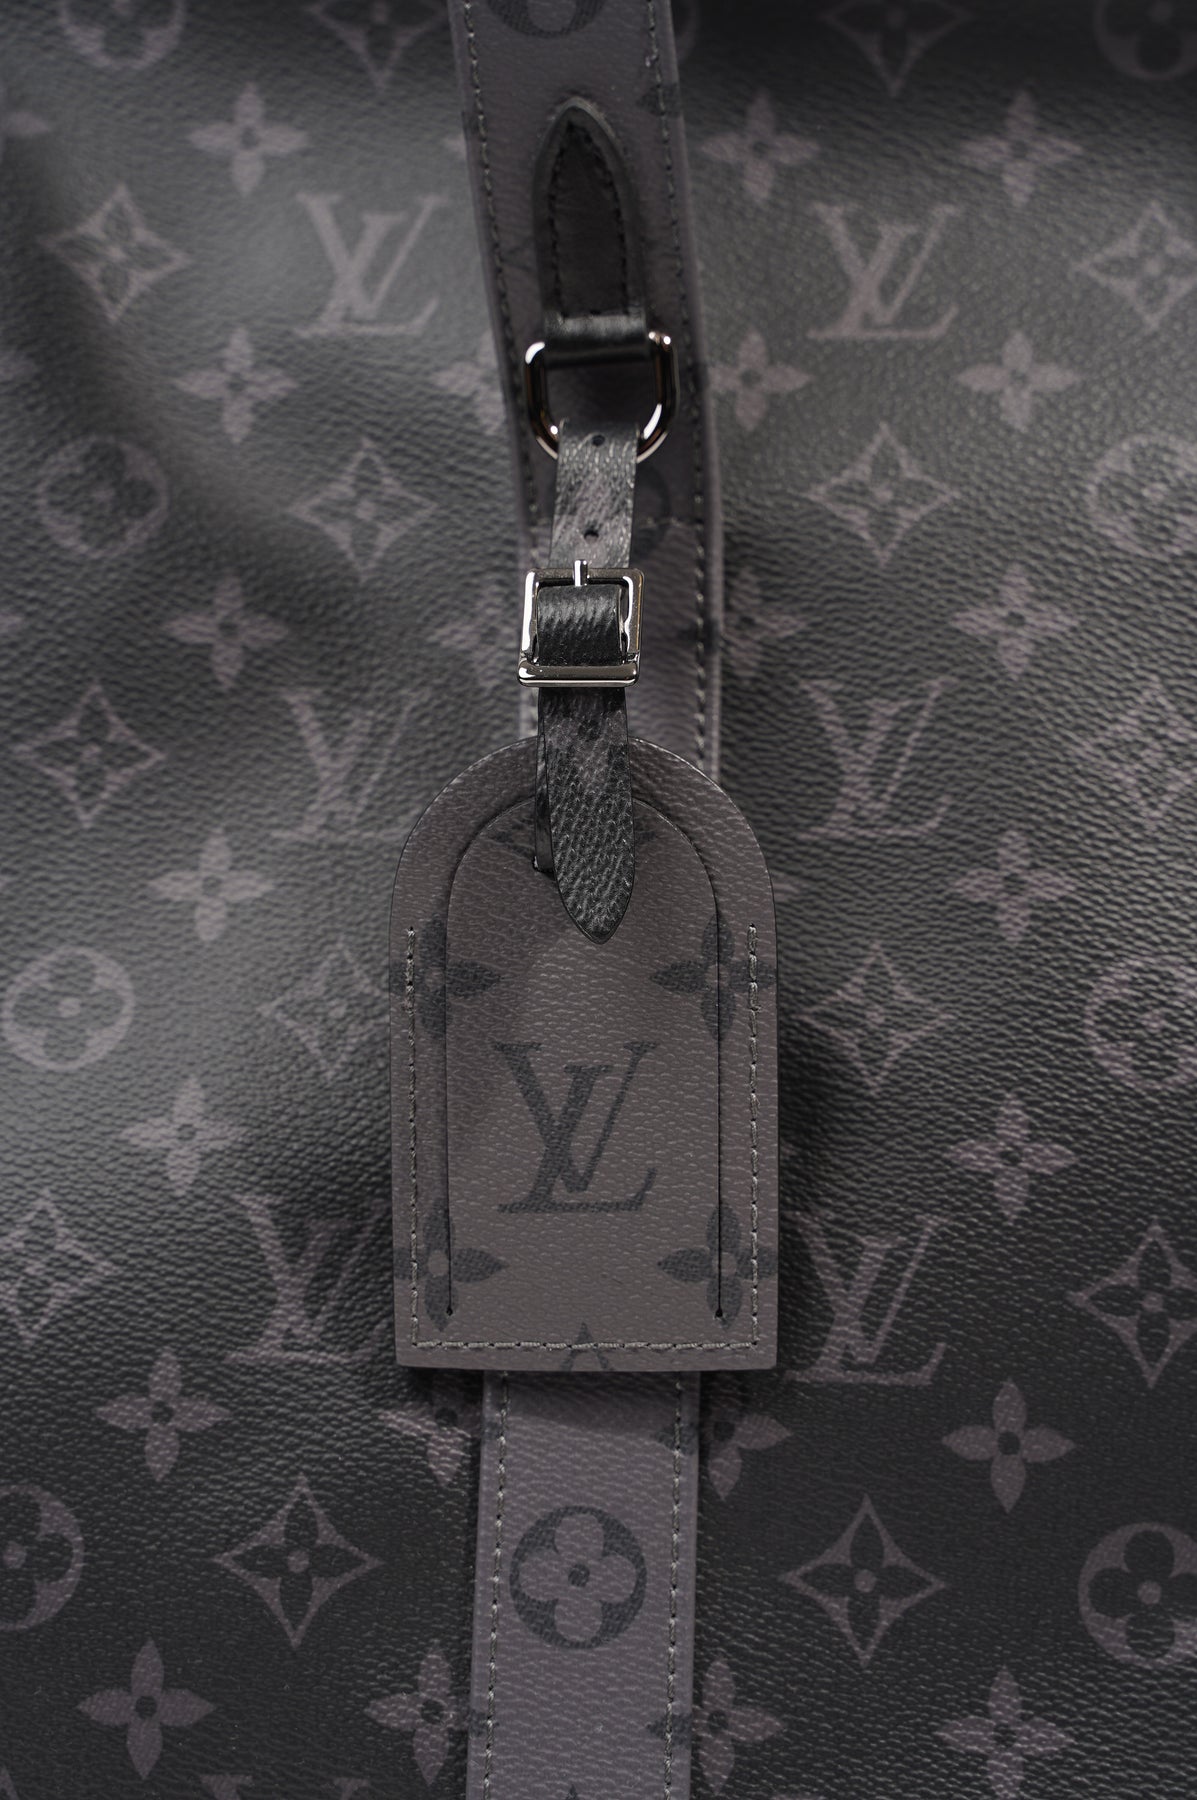 So glad I managed to grab the New Cabas Zippe Gm just before the price  increase, such an underrated bag! : r/Louisvuitton